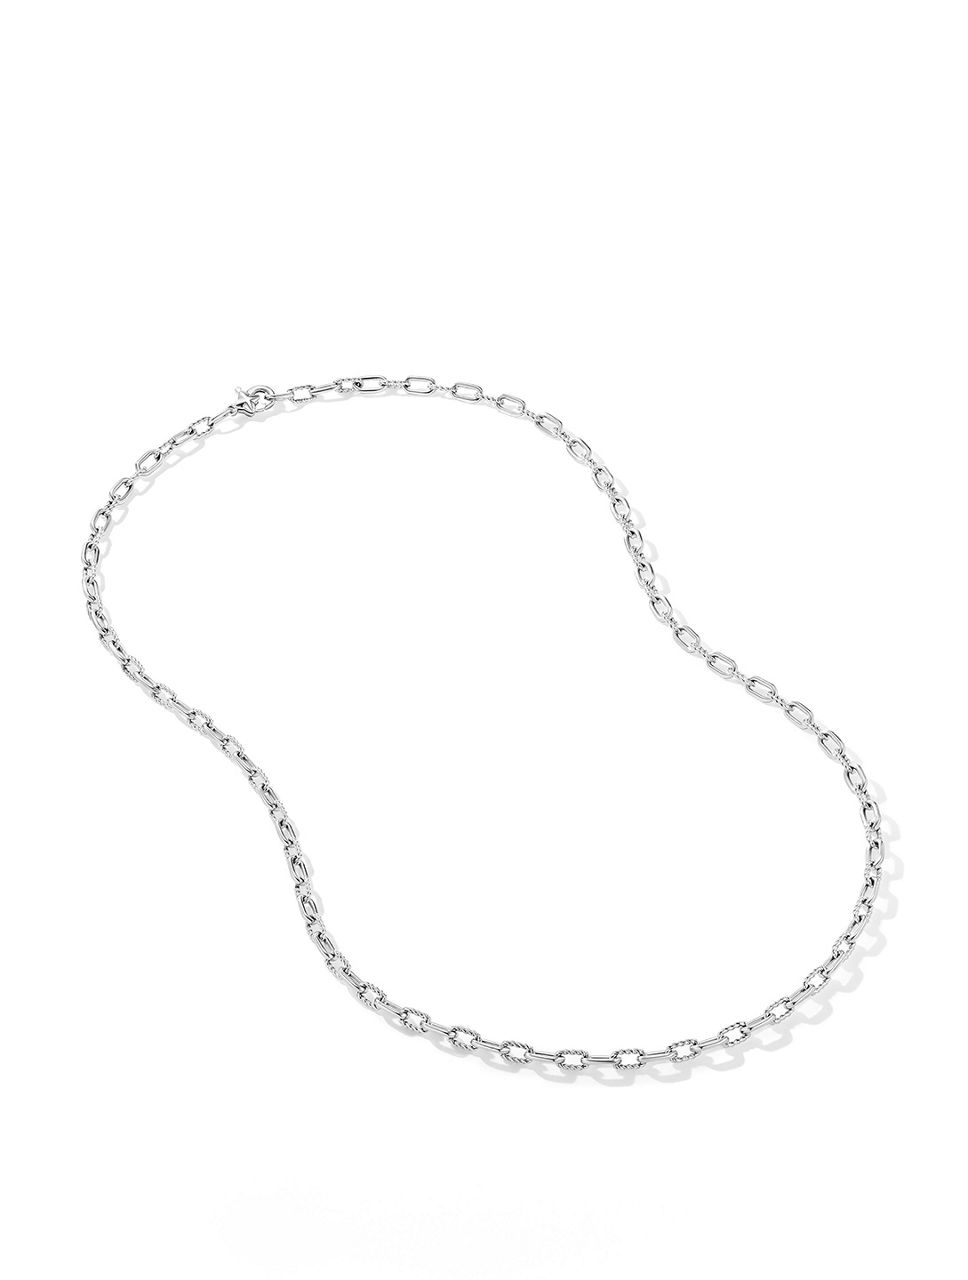 Dy Madison® Chain Necklace Sterling Silver, 3mm